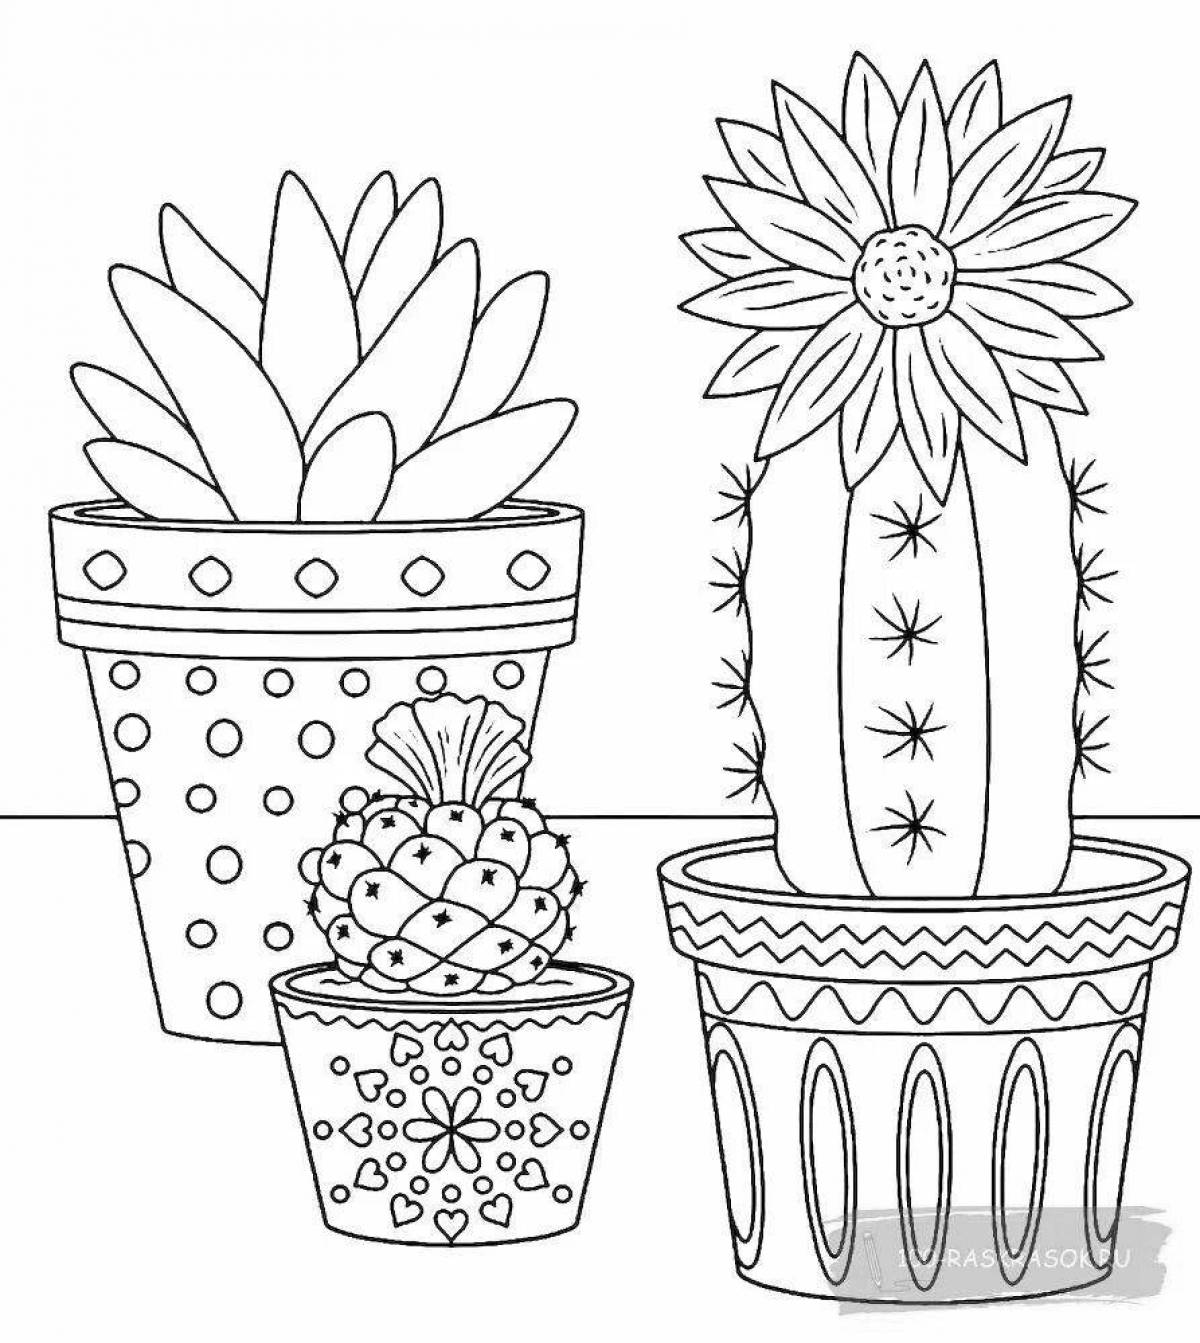 Sunny cactus in a pot for children